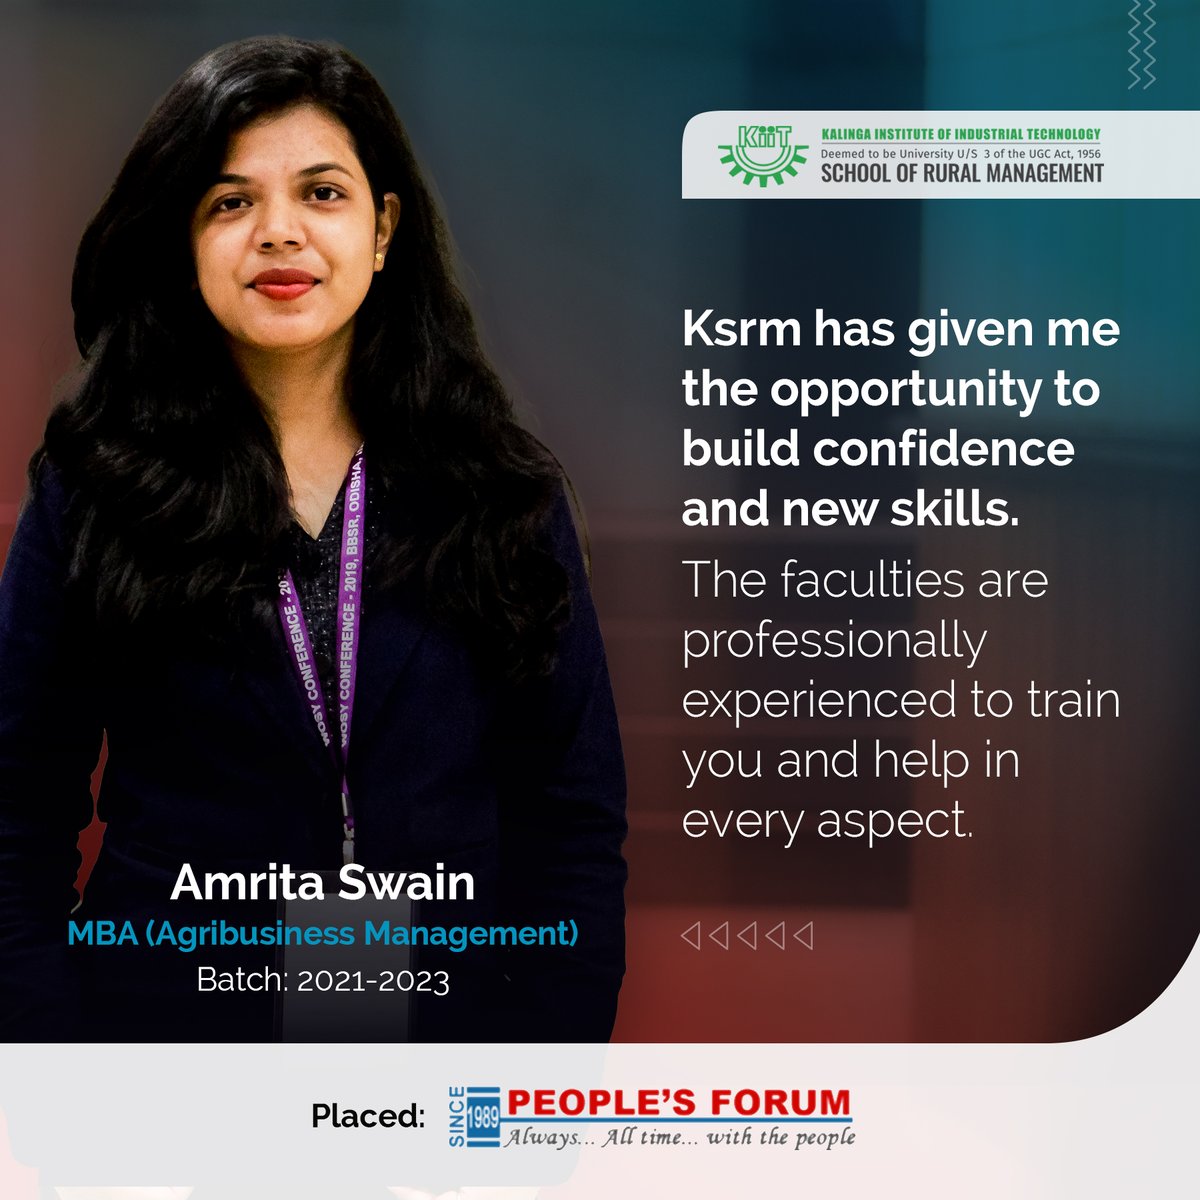 Through different measures, KSRM has continually strived to provide opportunities for academics and business to interact.

We extend our congratulations to Amrita Swain on her new role at People's Forum.

#ksrmbbsr #AgriBusinessManagement #RuralManagement #MBA #placement